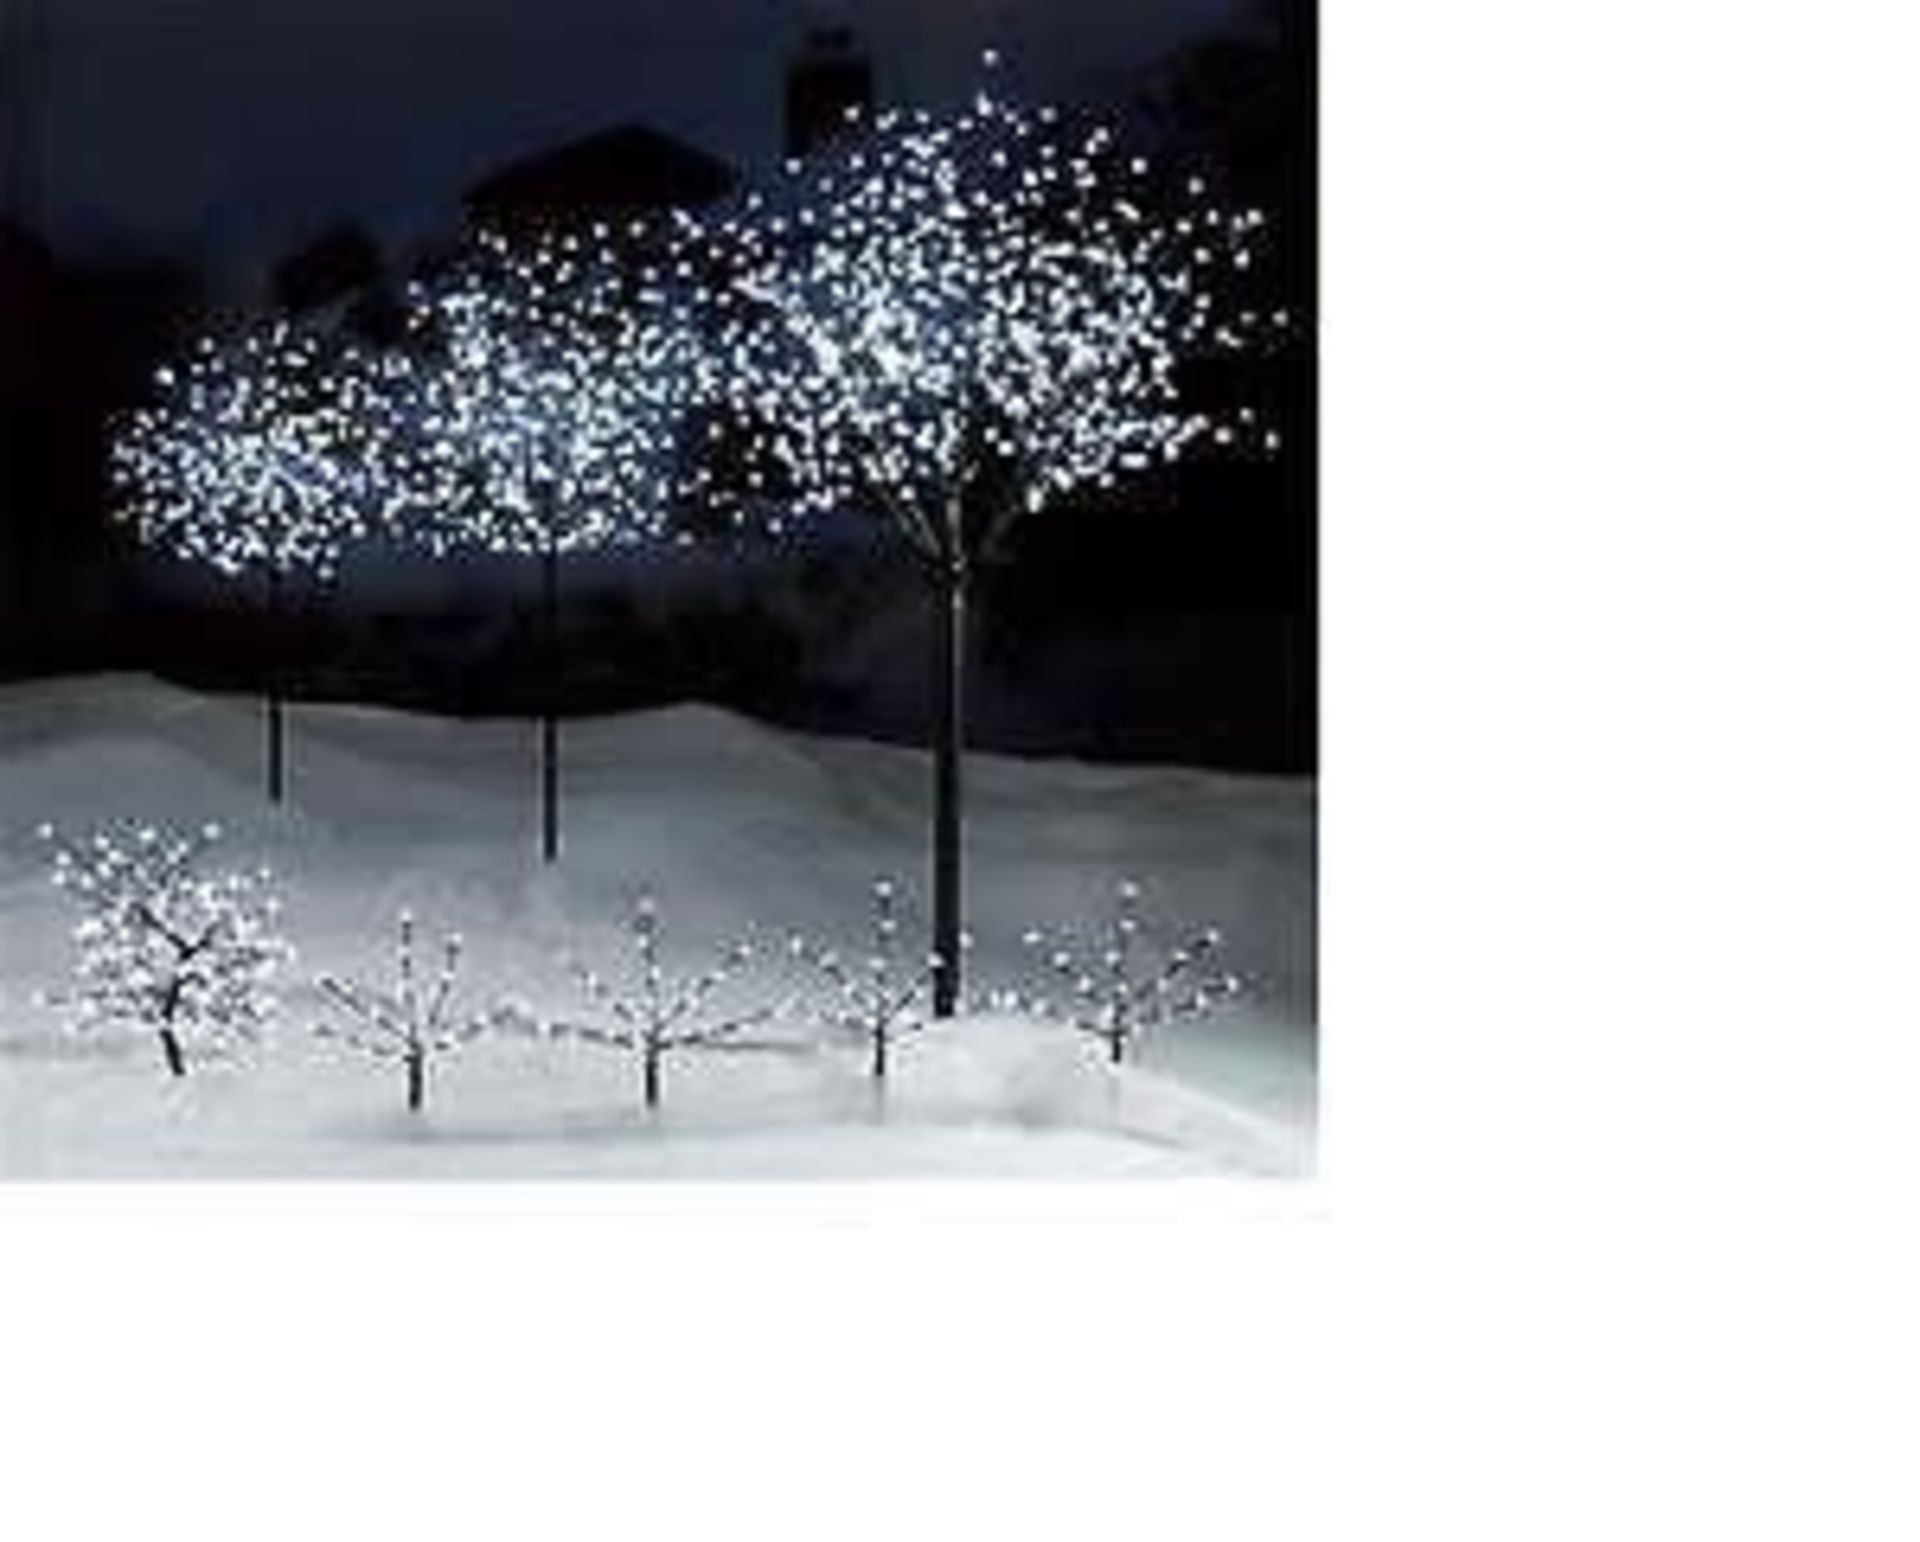 V Brand New 150cm Snow White LED Blossom Tree For Indoor And Outdoor Use RRP £54.99 - Image 2 of 2